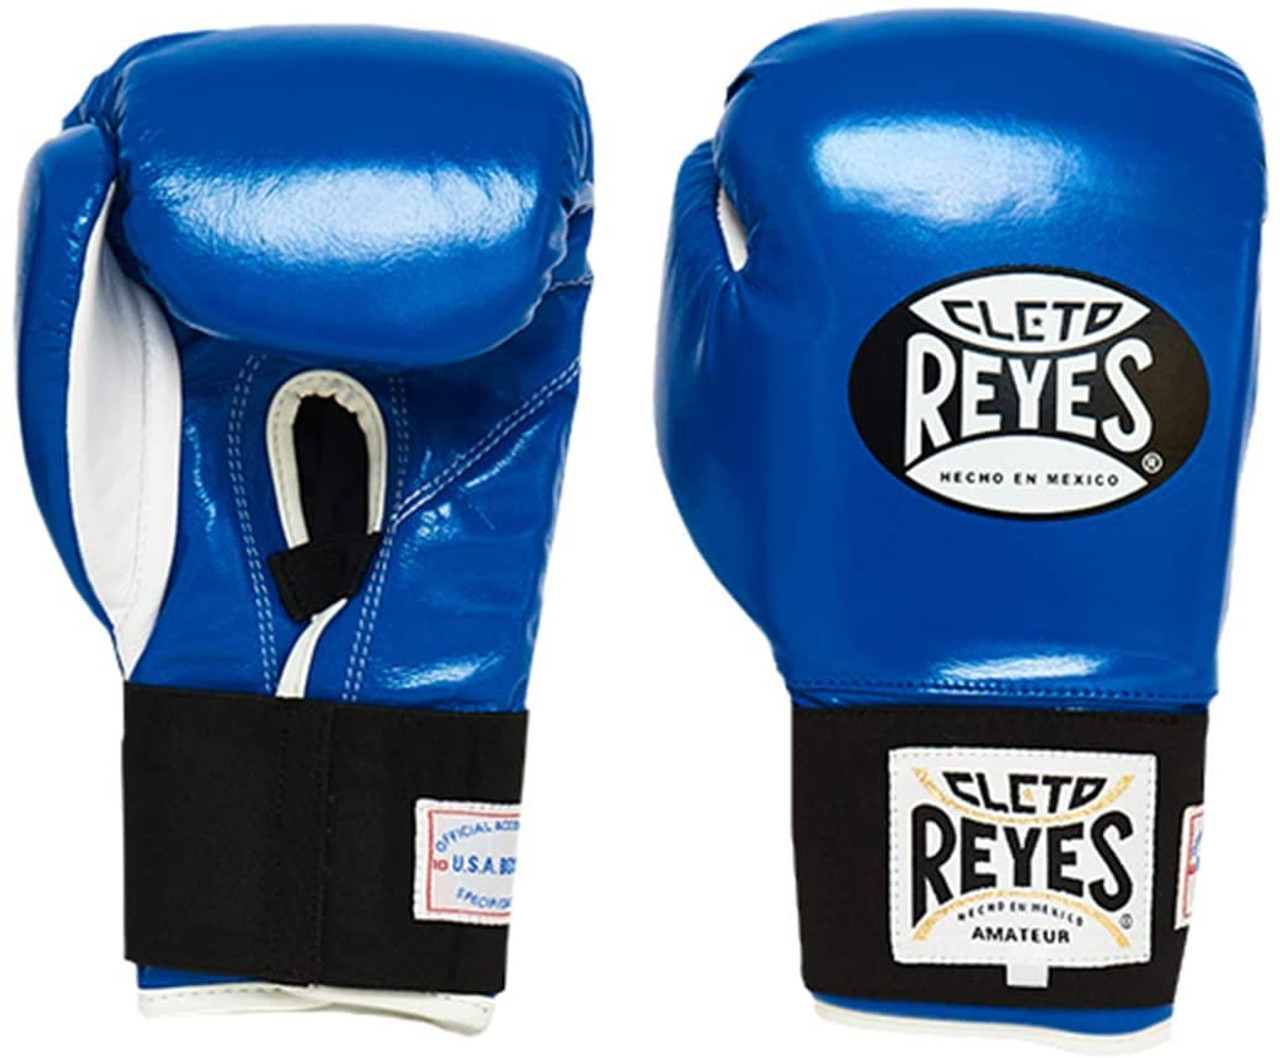 Cleto Reyes Amateur Boxing Gloves USA Boxing Approved